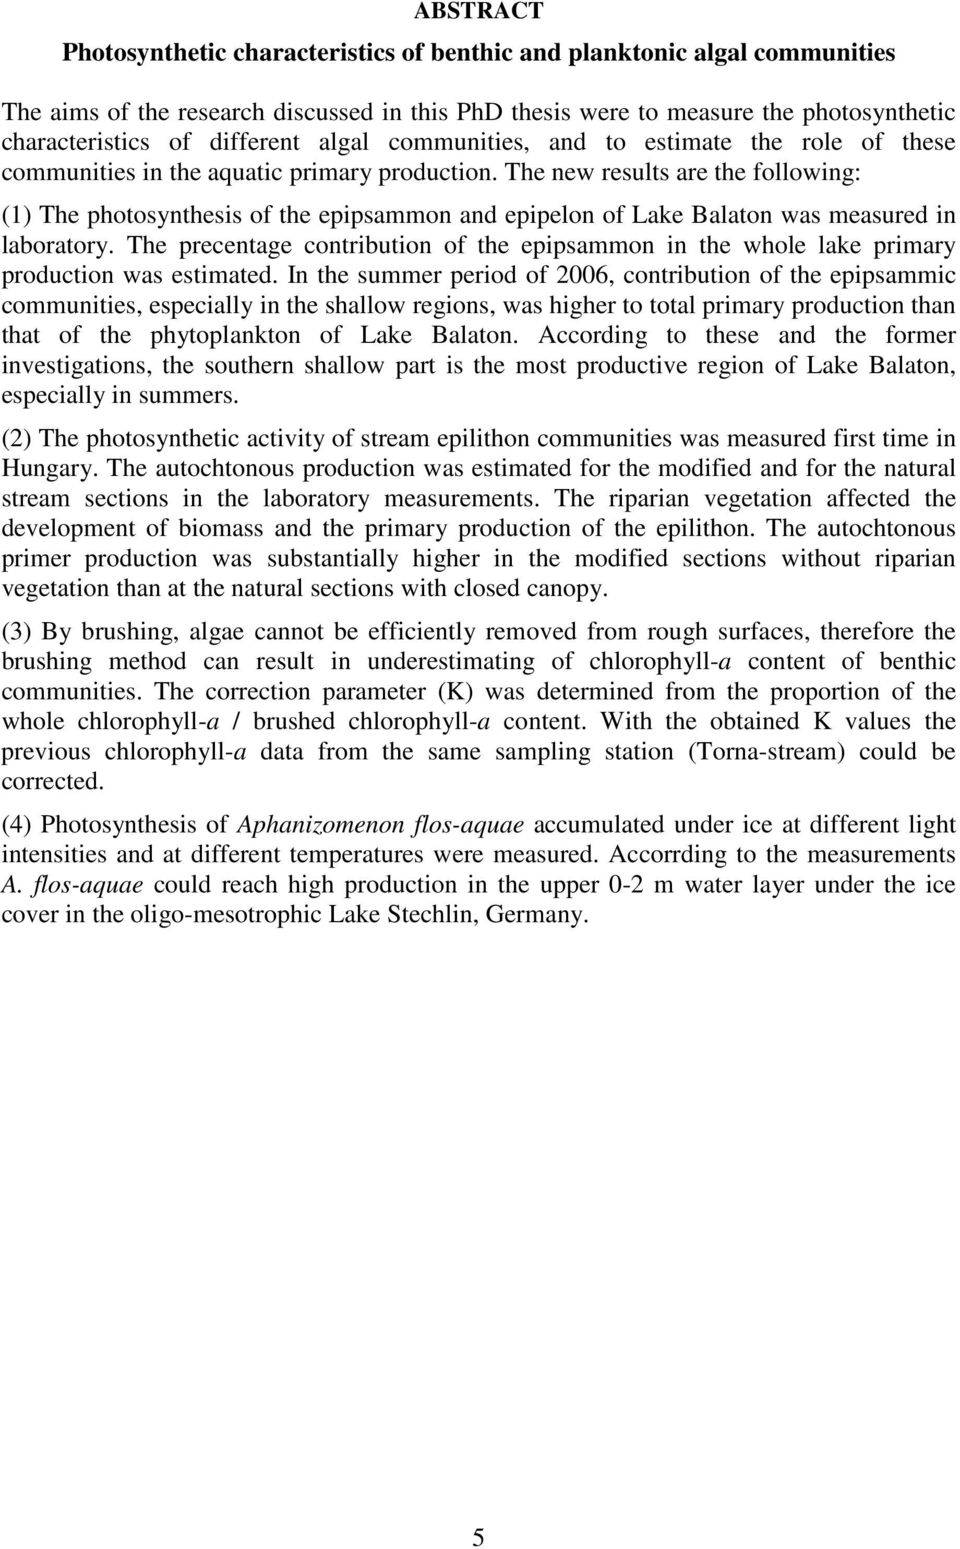 The new results are the following: (1) The photosynthesis of the epipsammon and epipelon of Lake Balaton was measured in laboratory.